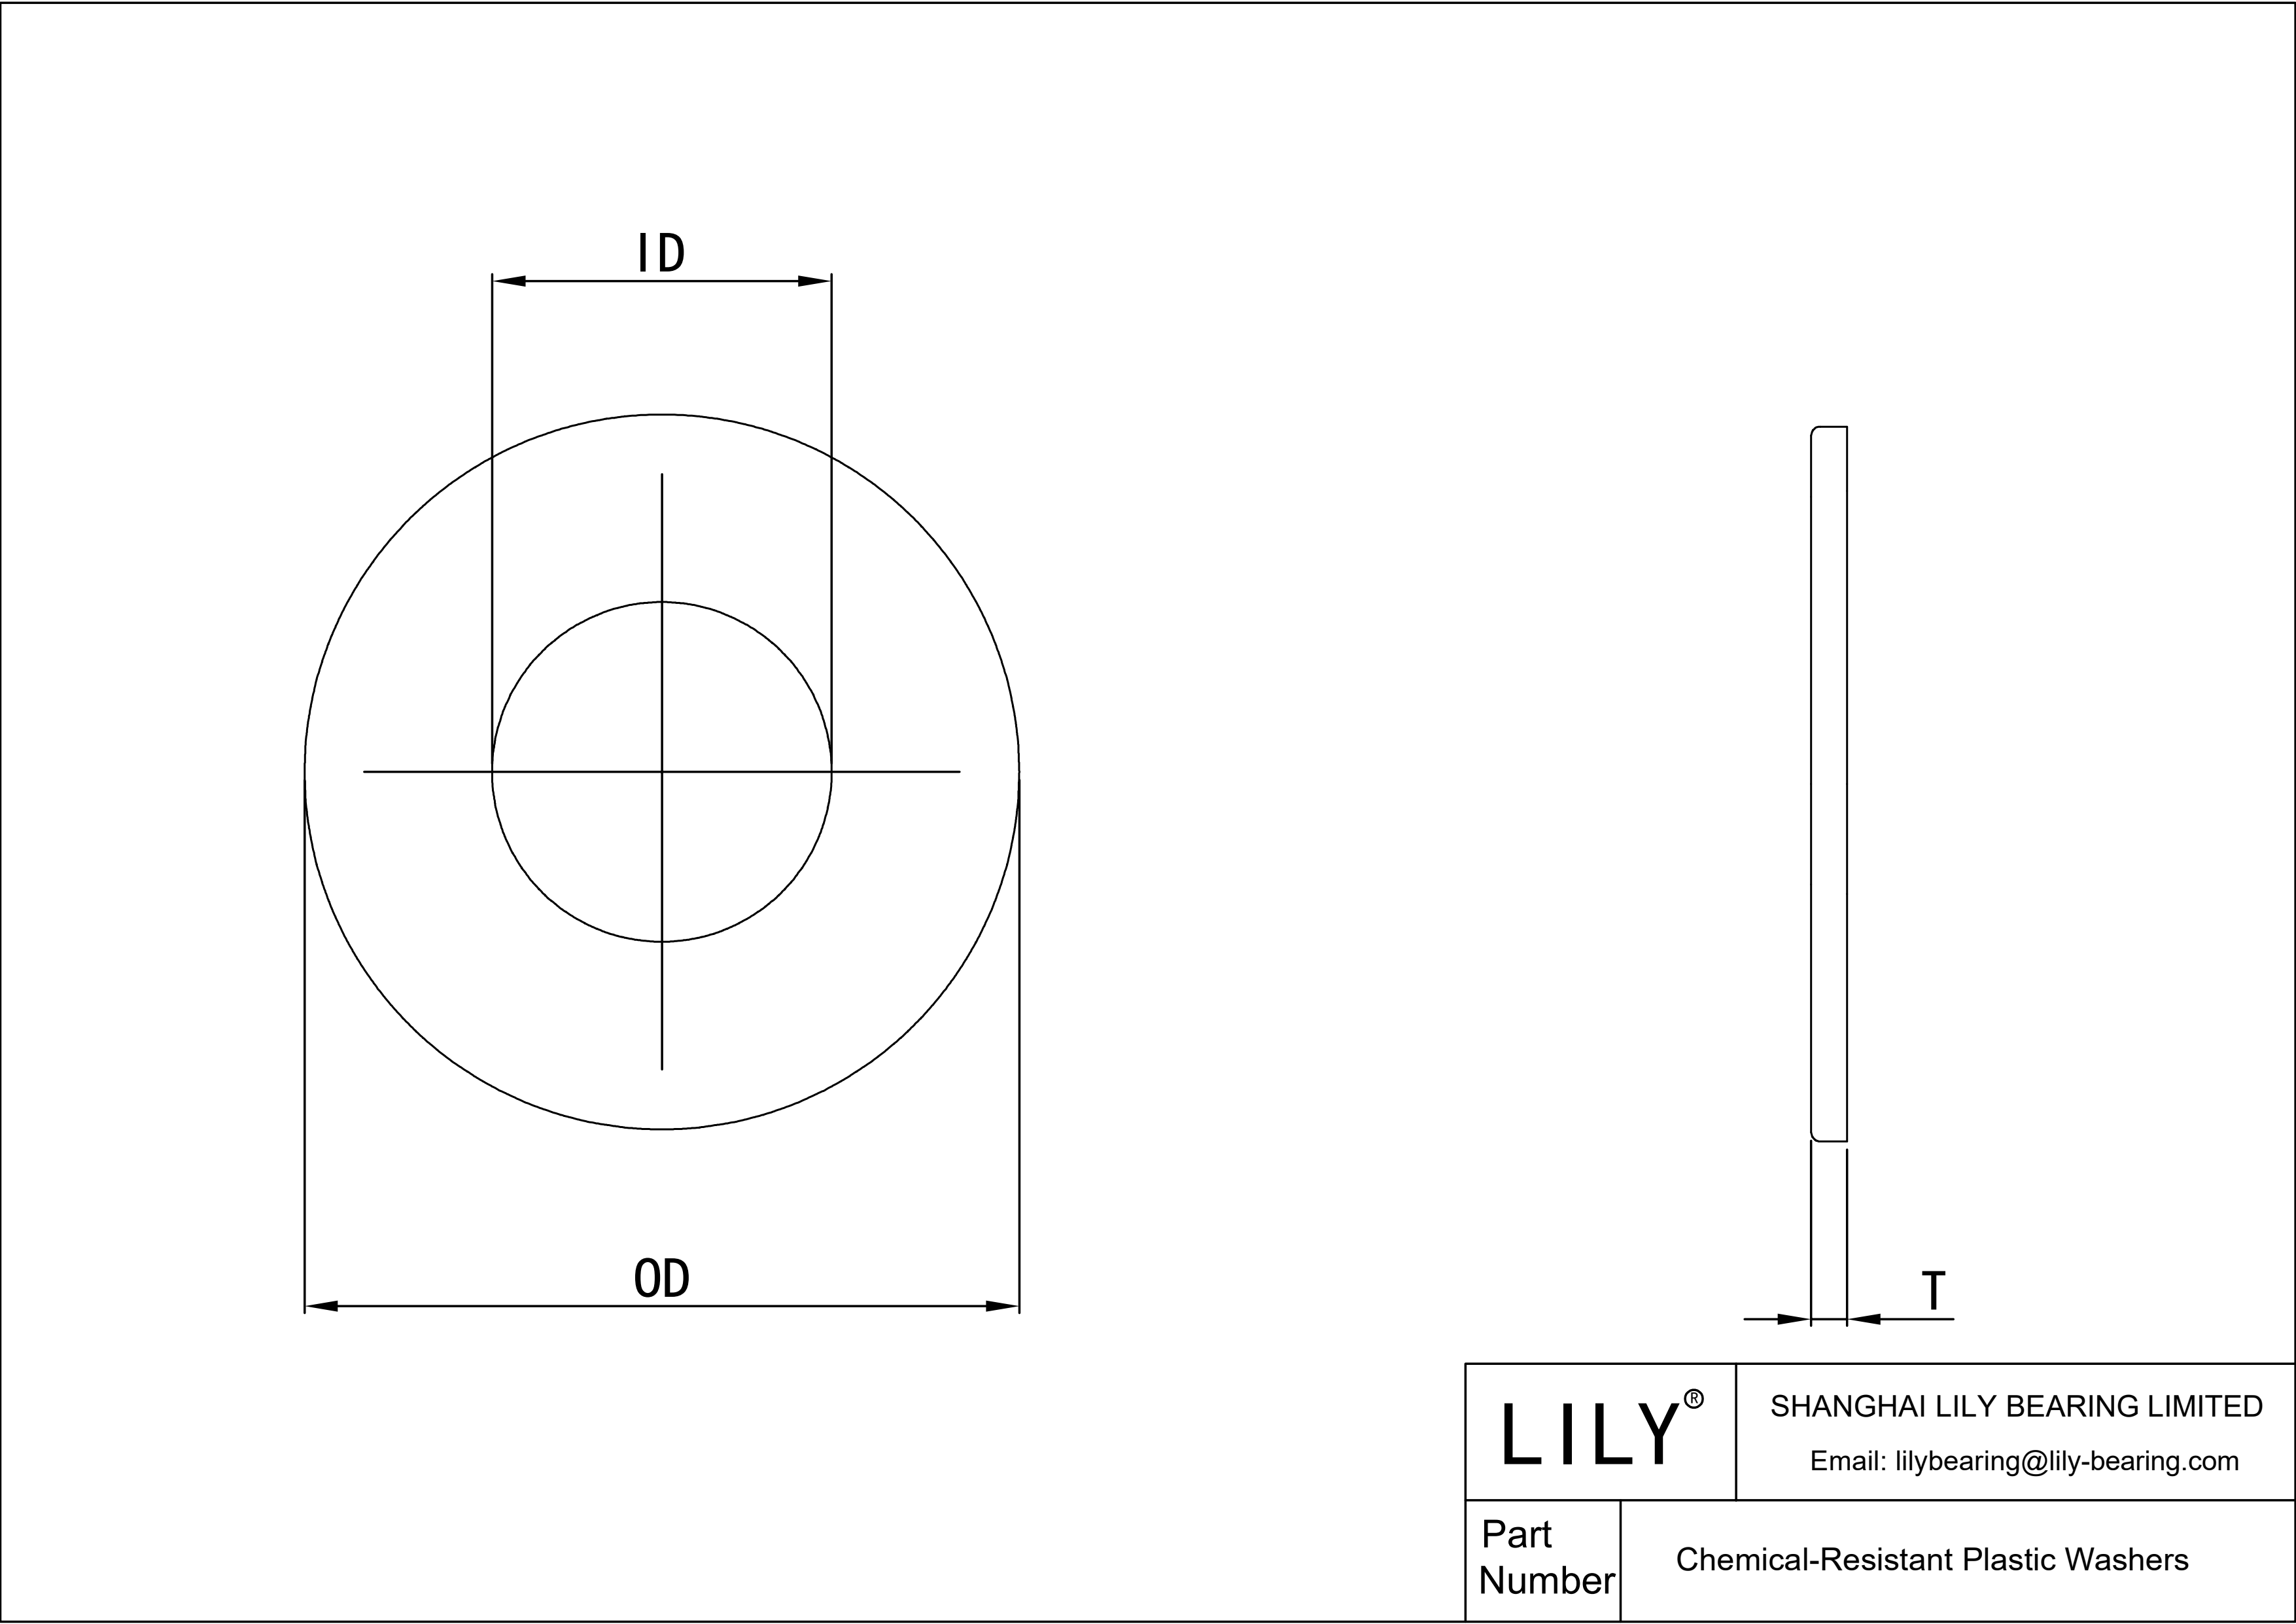 JFGDAAIDD Chemical-Resistant Plastic Washers cad drawing